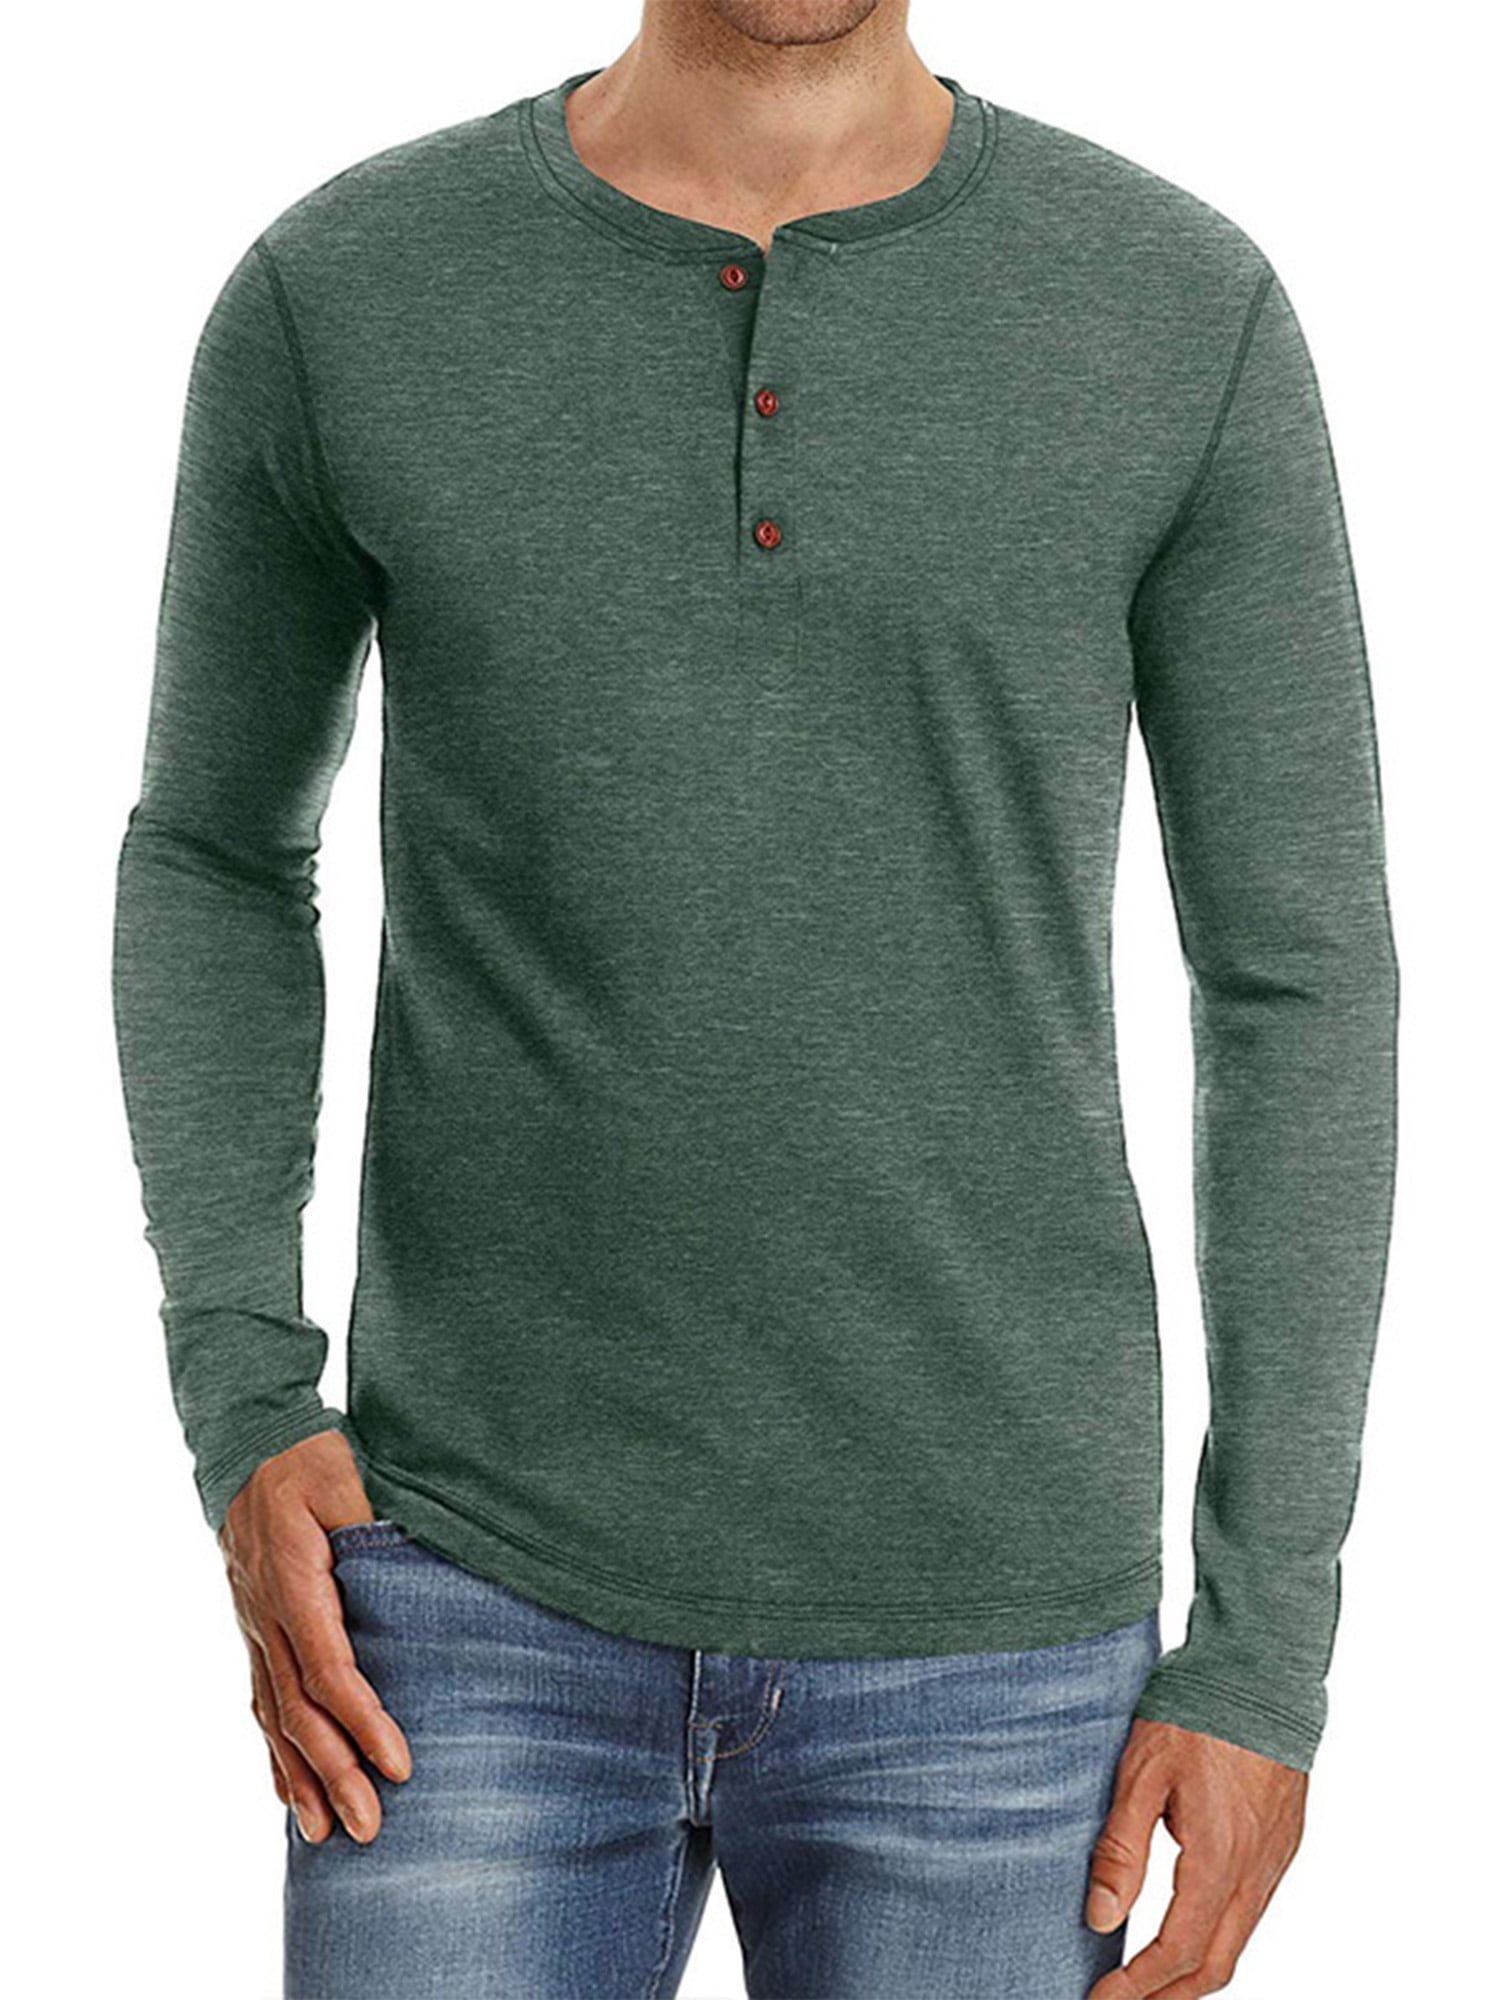 Mens Henley 3 Button Thermal Long Sleeve Tee Shirt Casual Knit Winter wear NEW 